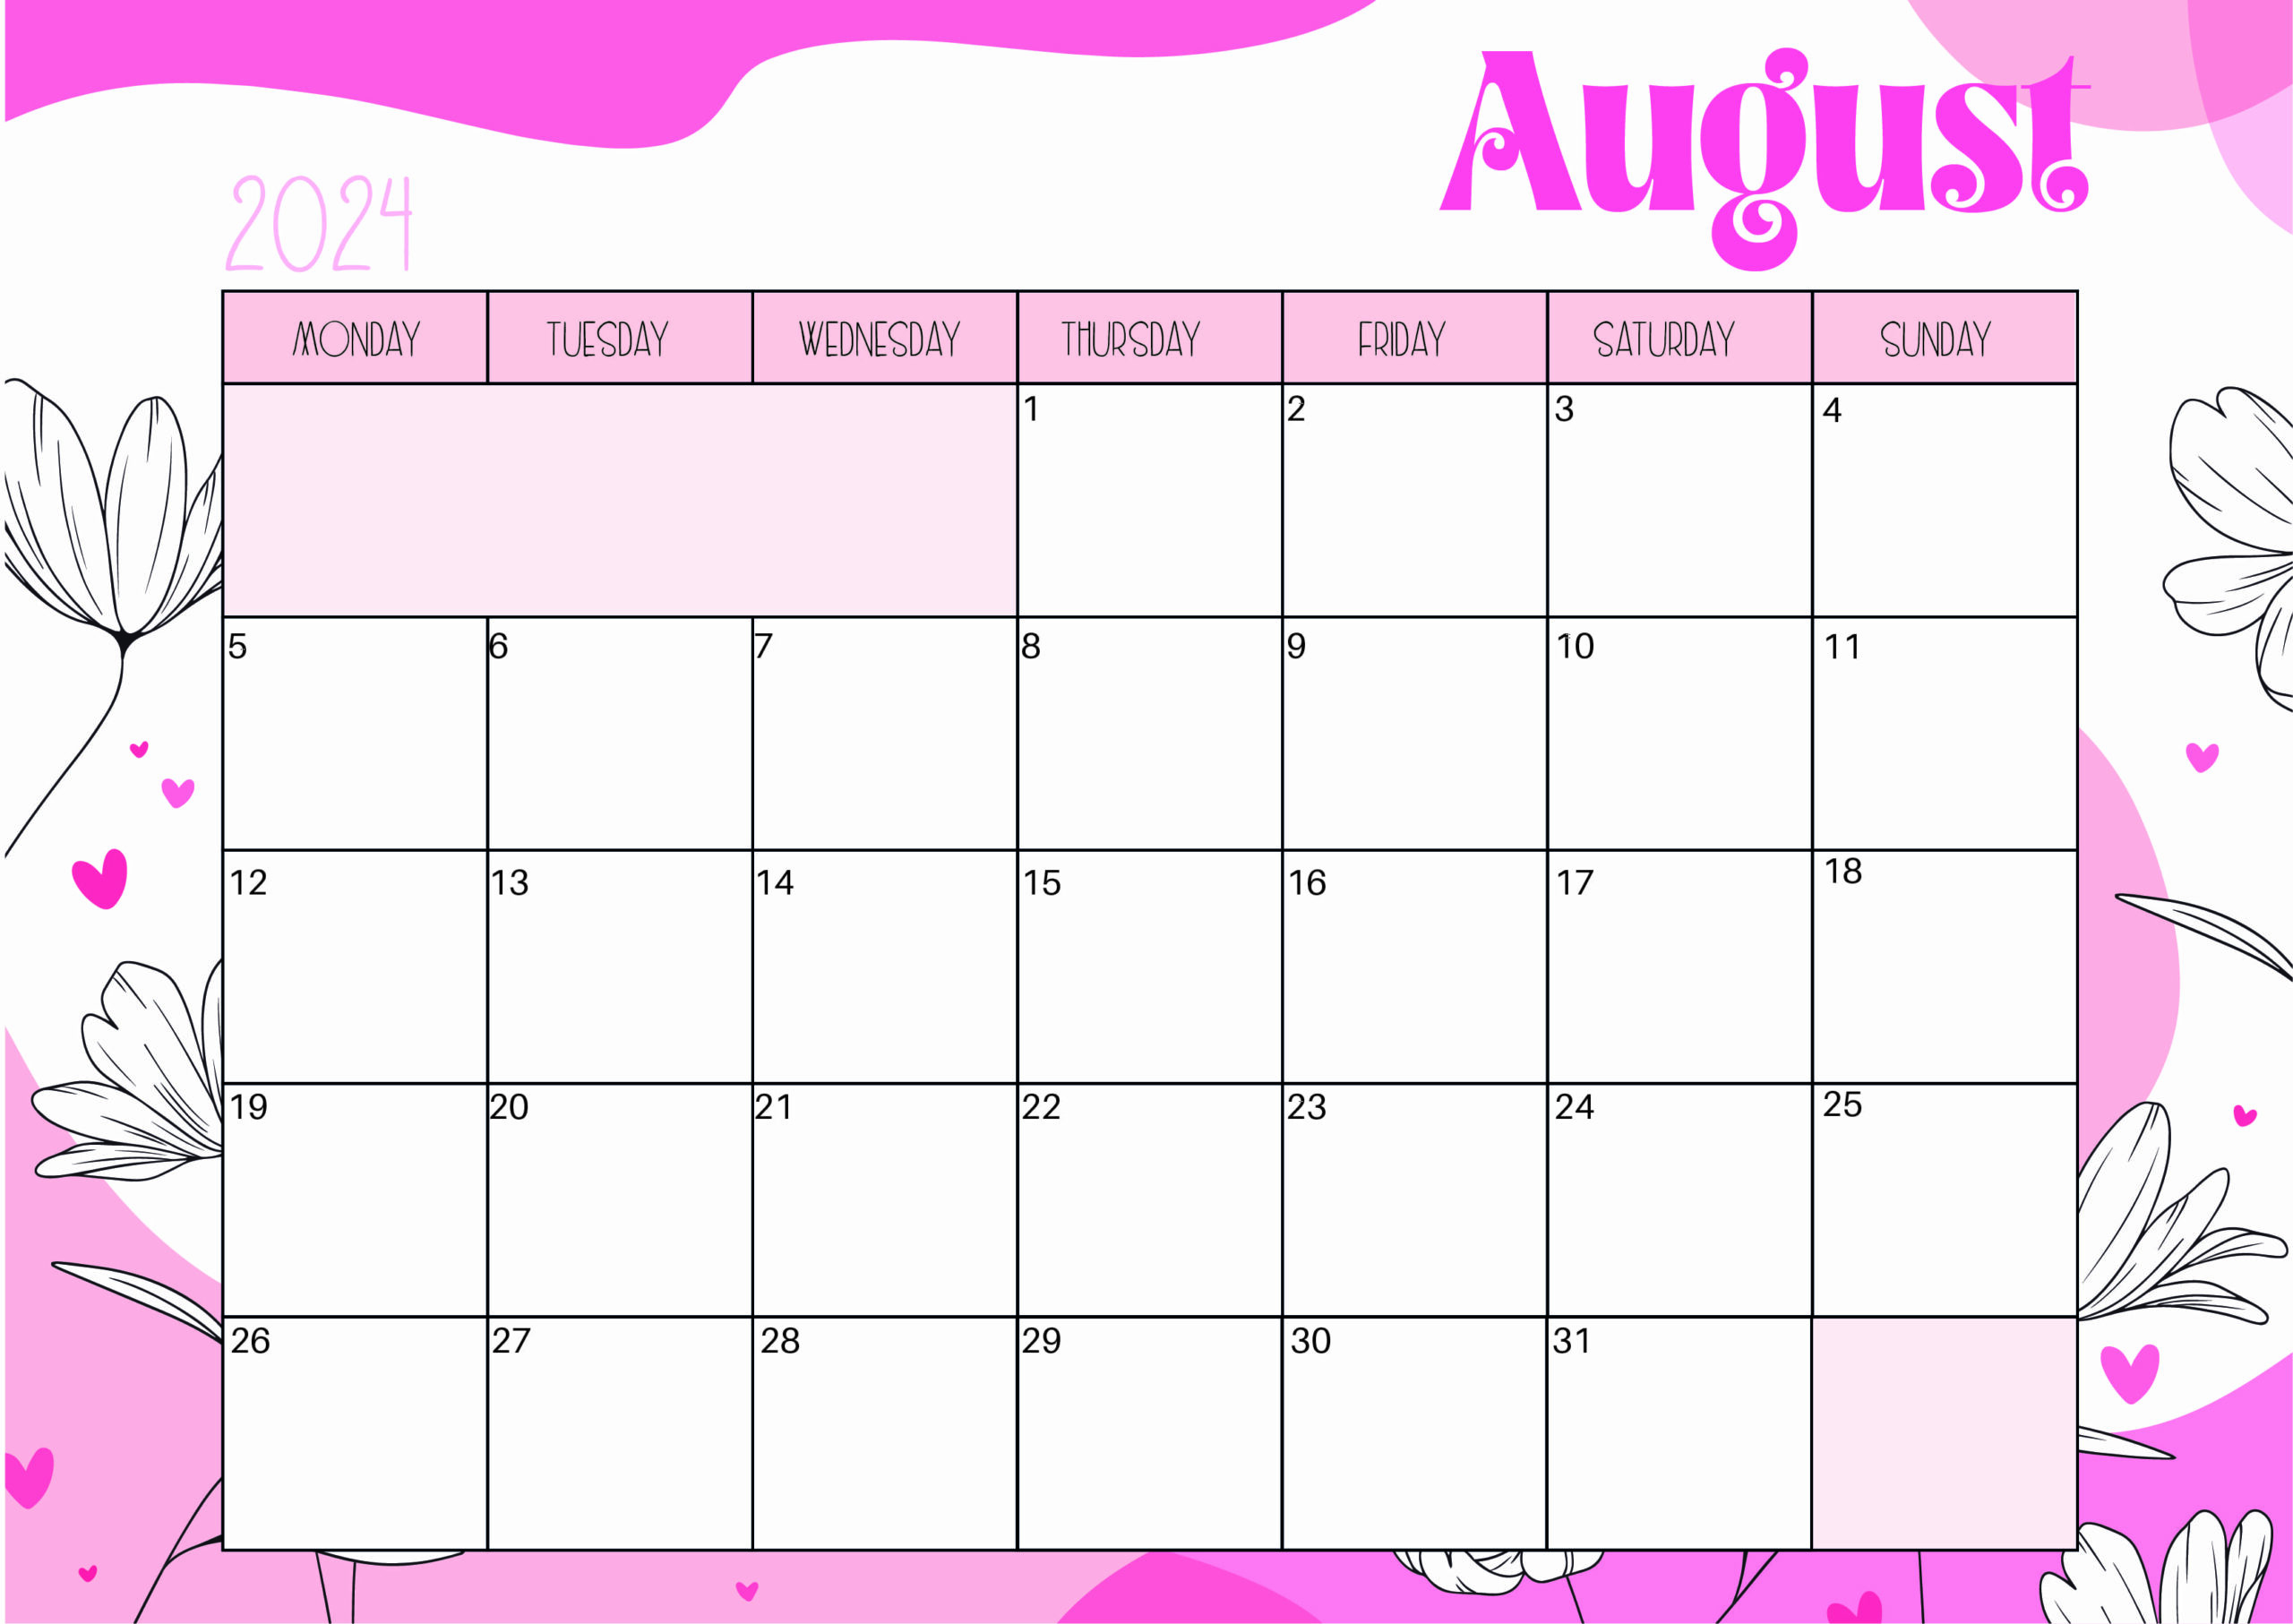 August 2024 Calendar for Printing in PDF